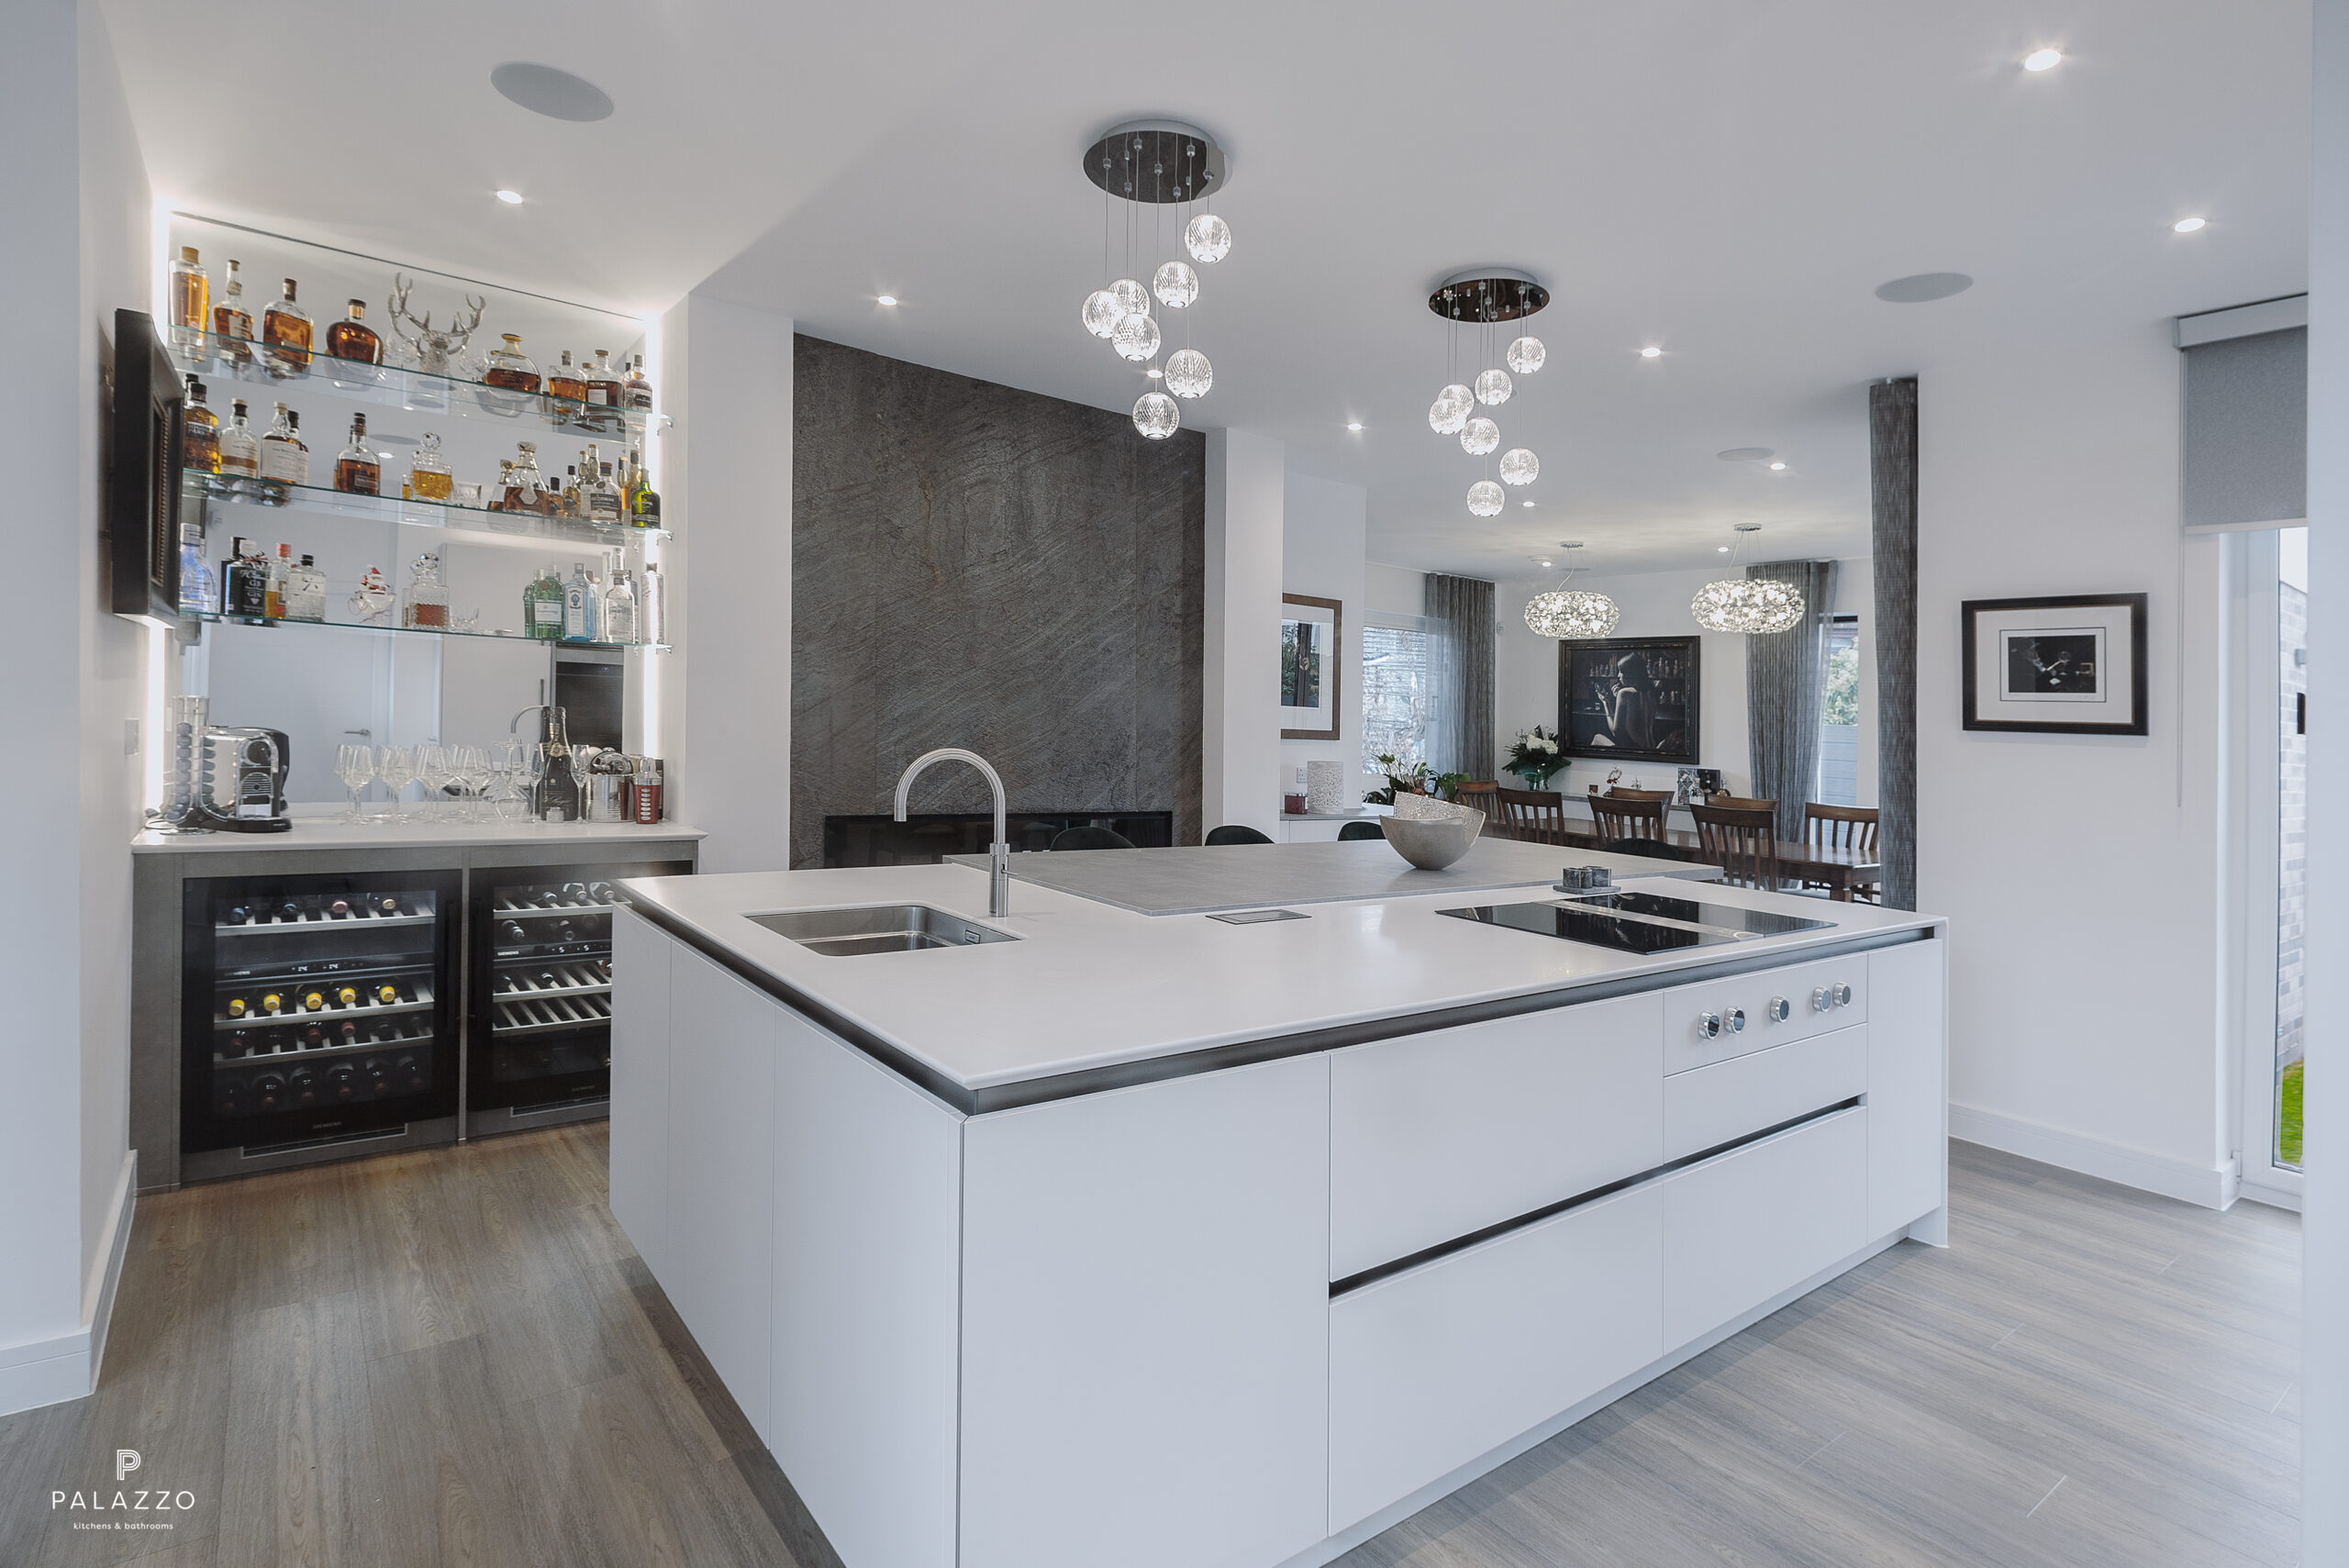 Image 9: We have the best kitchen designers in Glasgow